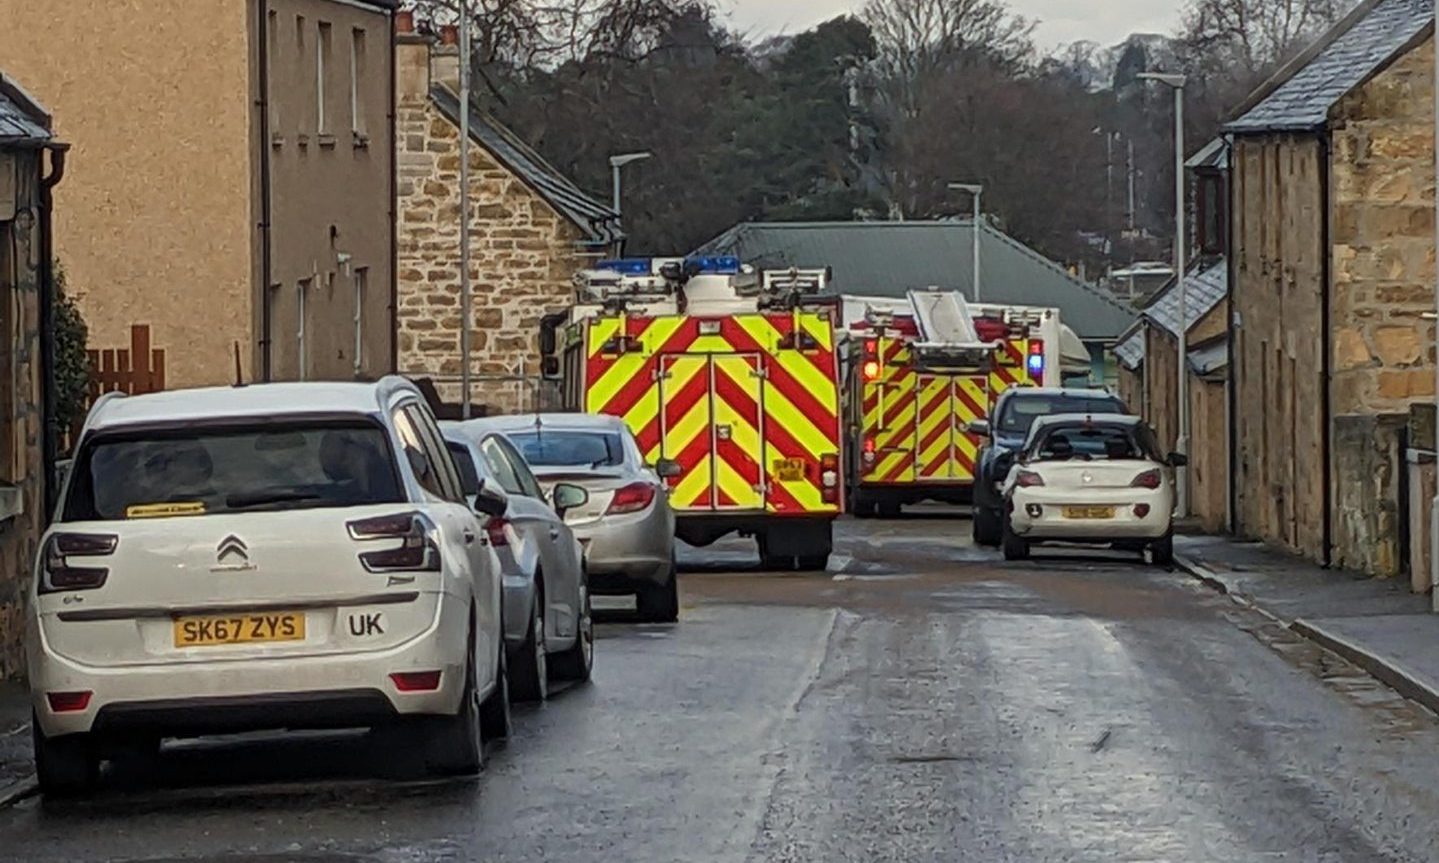 Fire engines block a residential street in New Elgin following a crash.